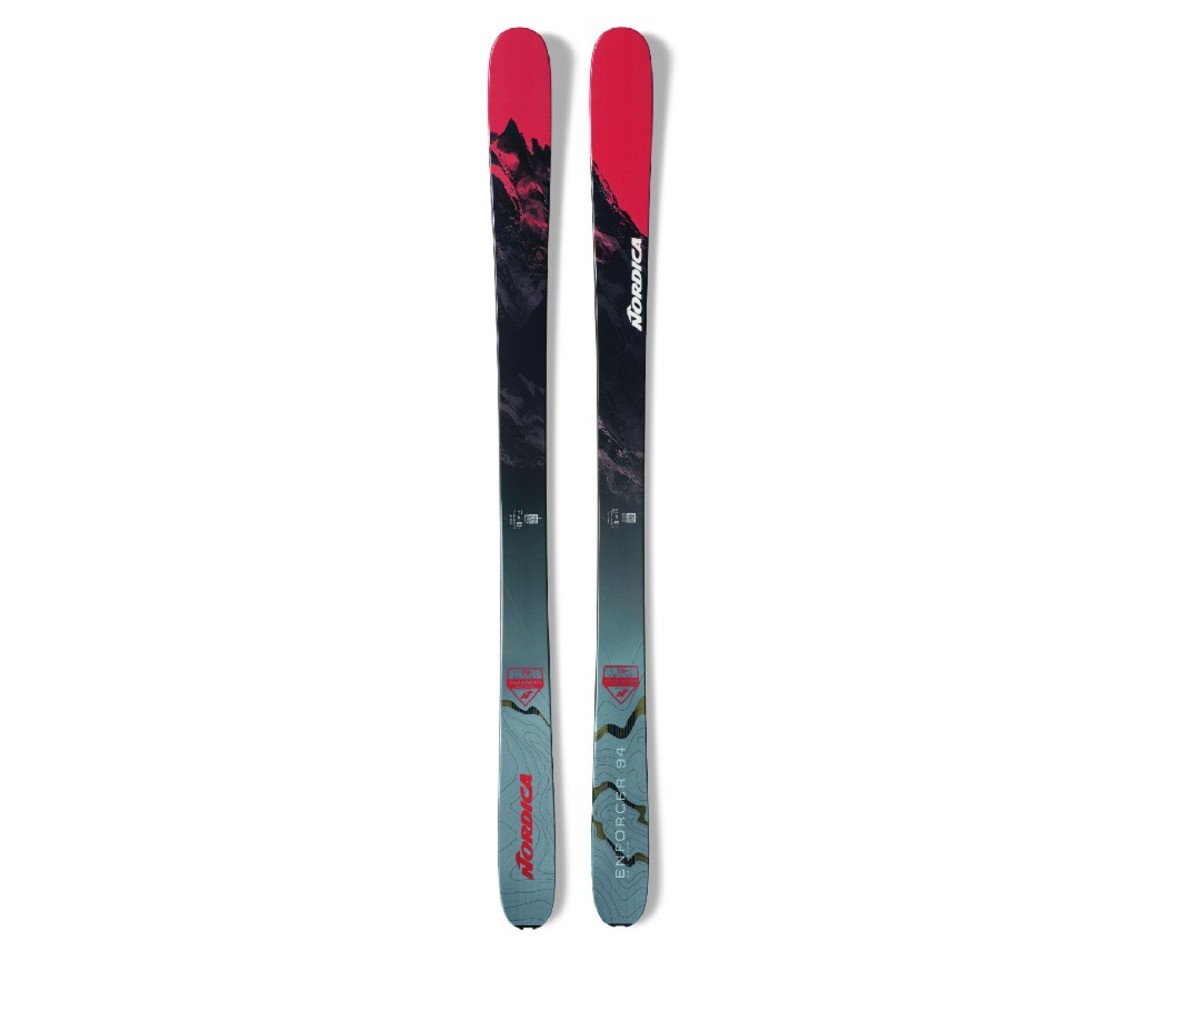 Pair of Nordica Enforcer Unlimited 94 skis